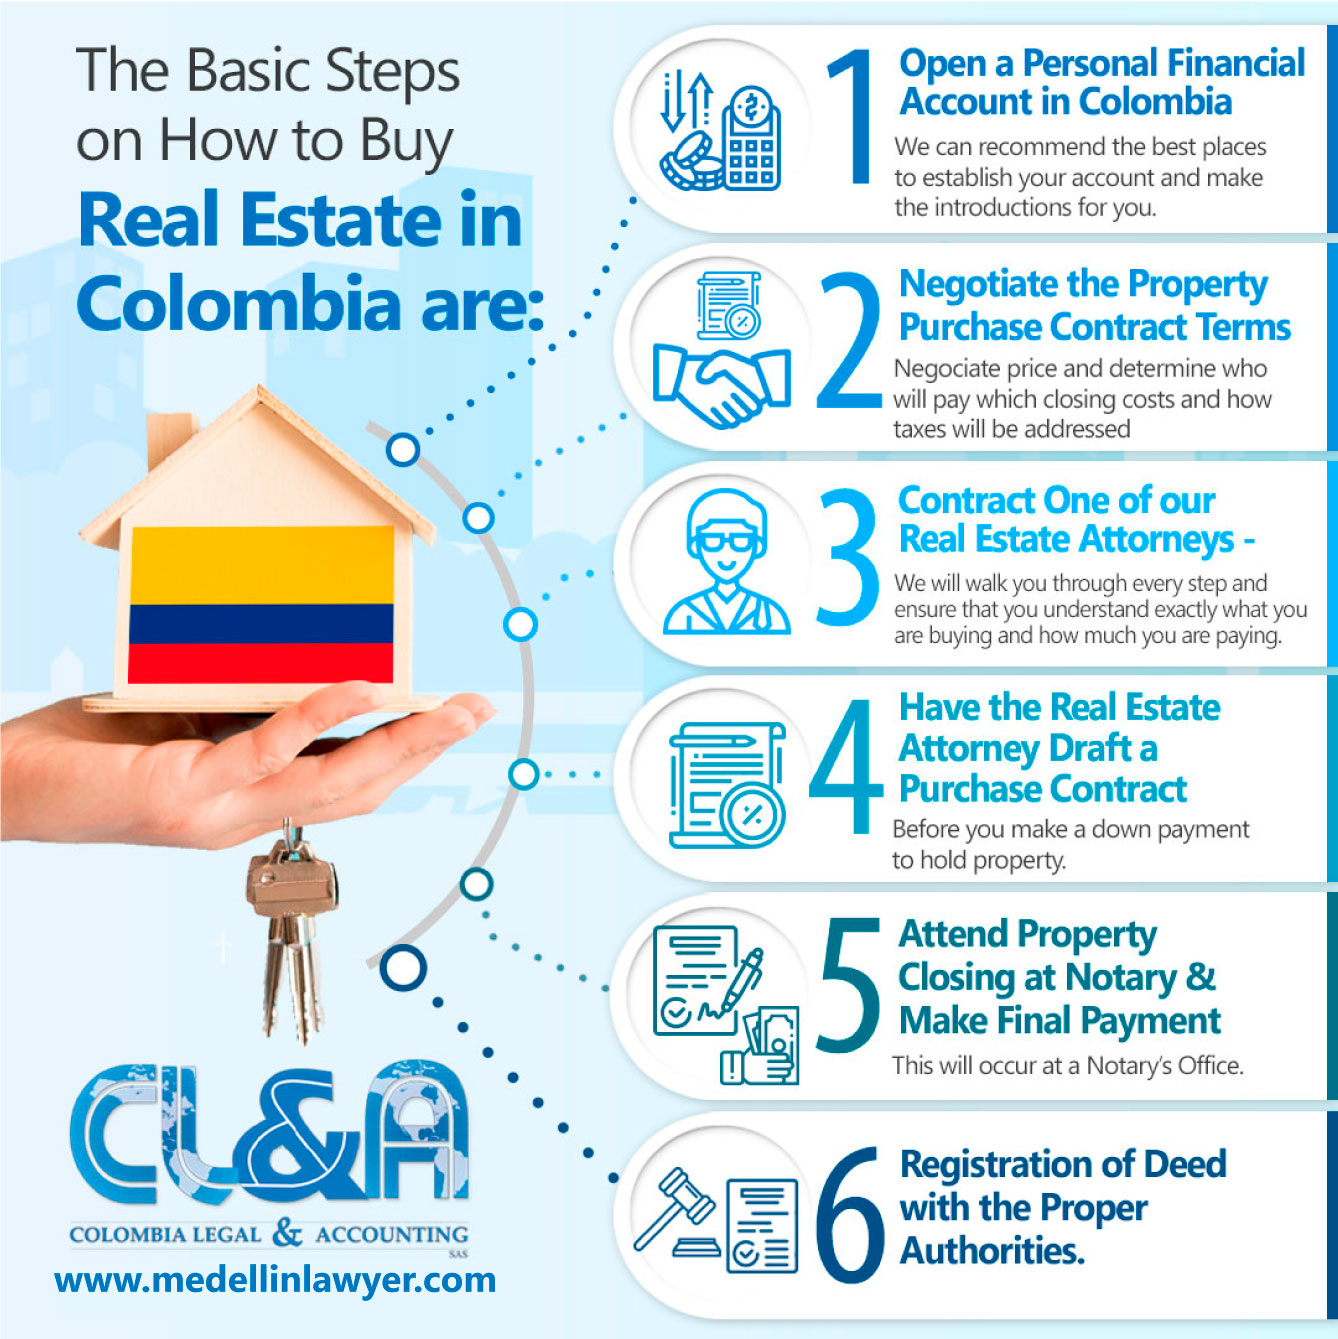 The-basic-steps-on-how-to-buy-real-estate-in-colombia